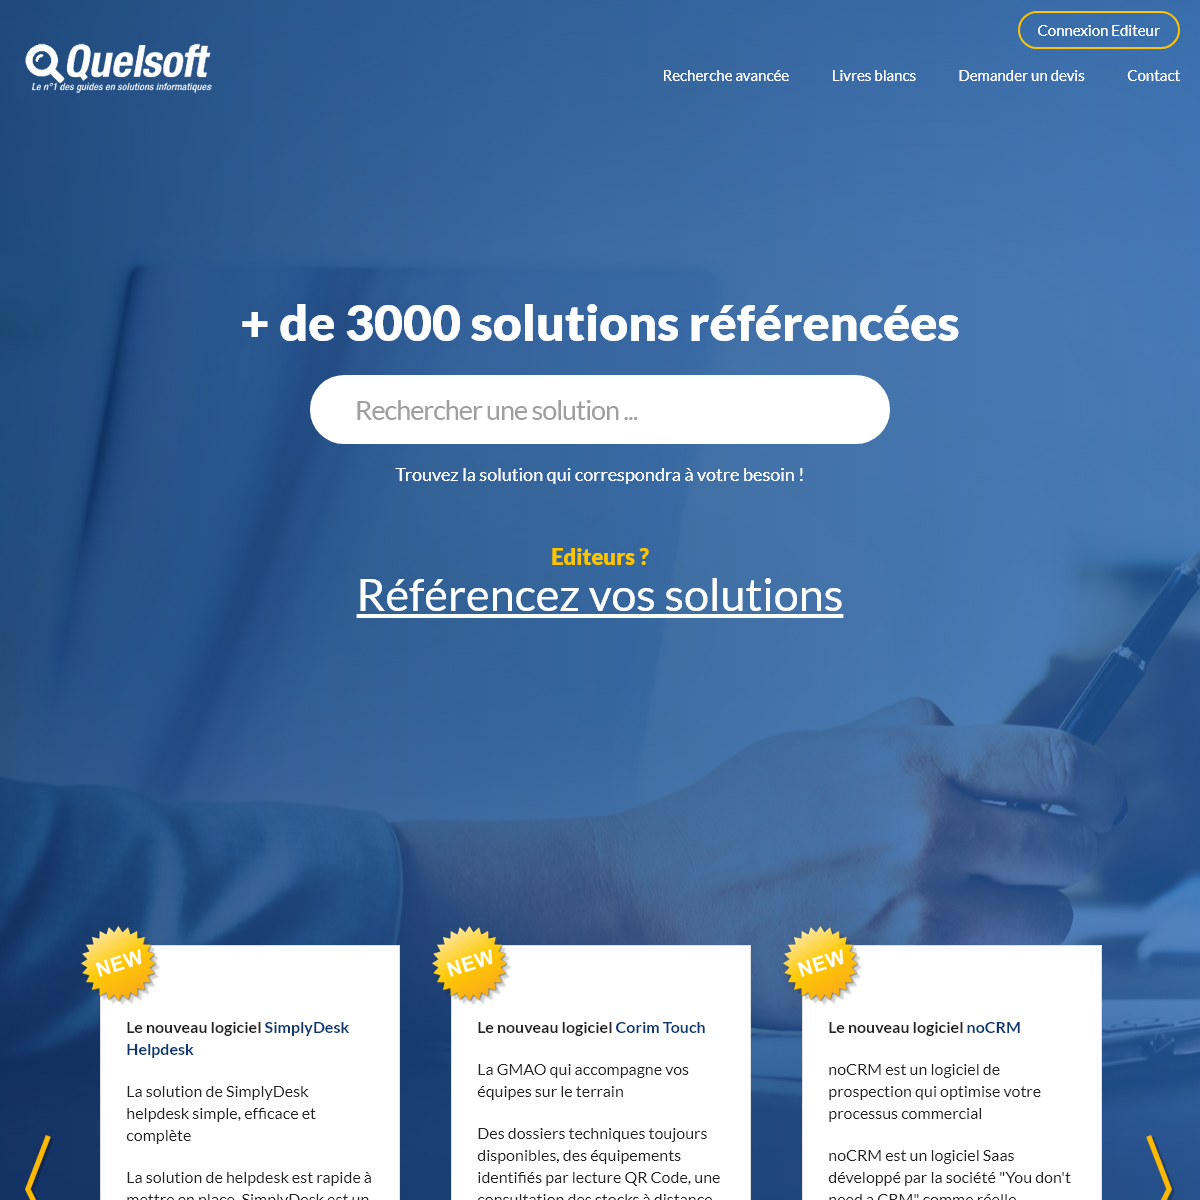 A complete backup of quelsoft.com